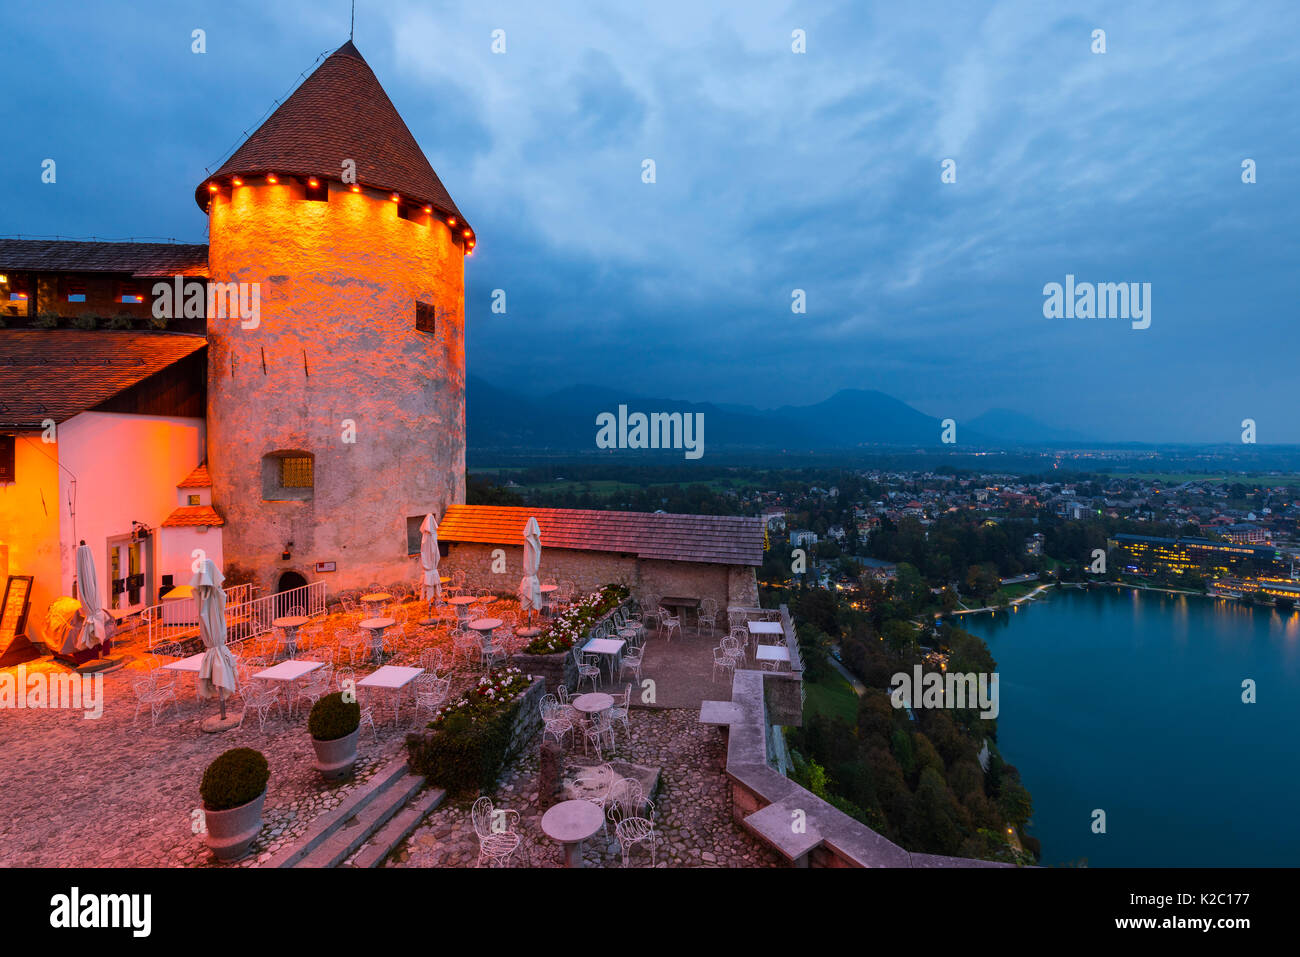 Bled Castle at twilight, Bled, Slovenia, October 2014. Stock Photo